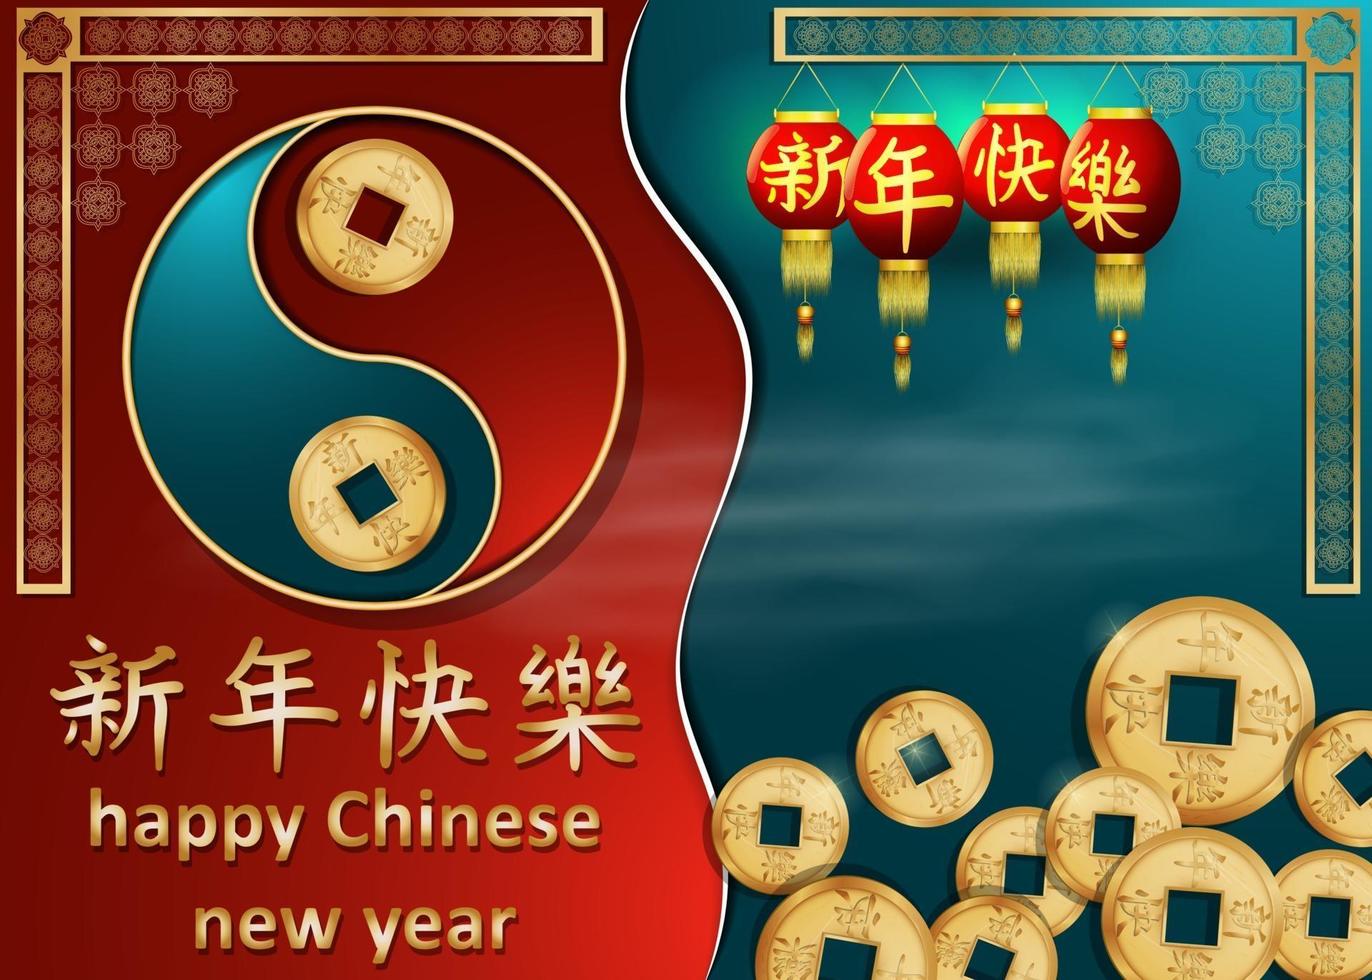 Chinese new year greeting card design vector